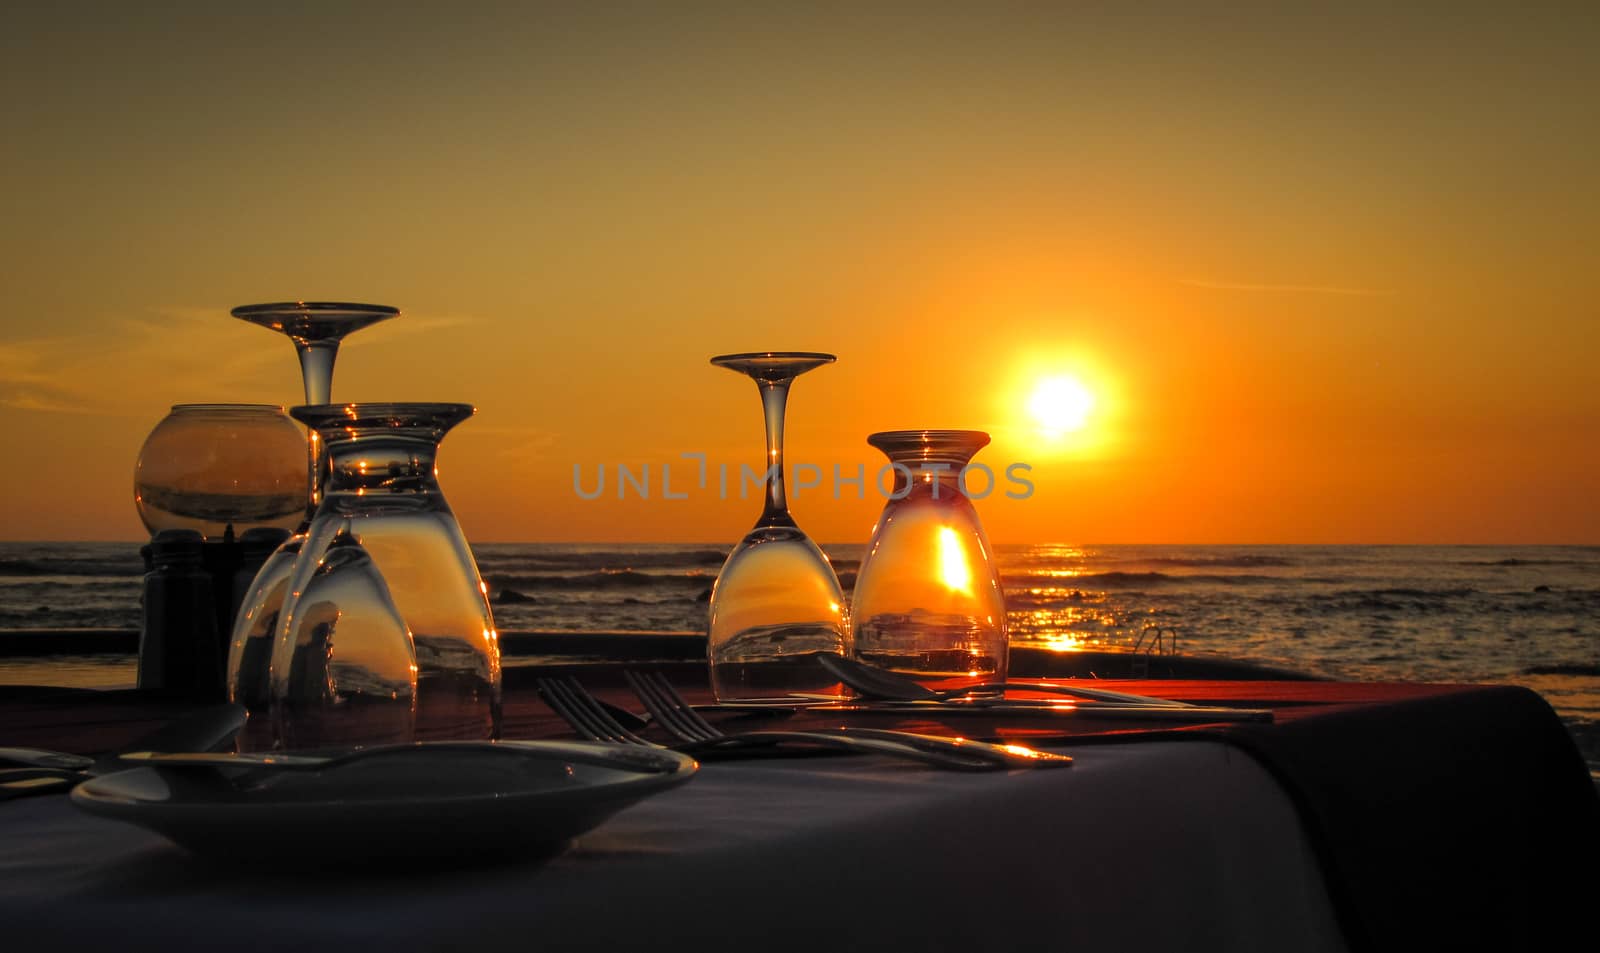 Sunset On the Pacific In El Salvador - special Valentine's occasion dinner by valleyboi63